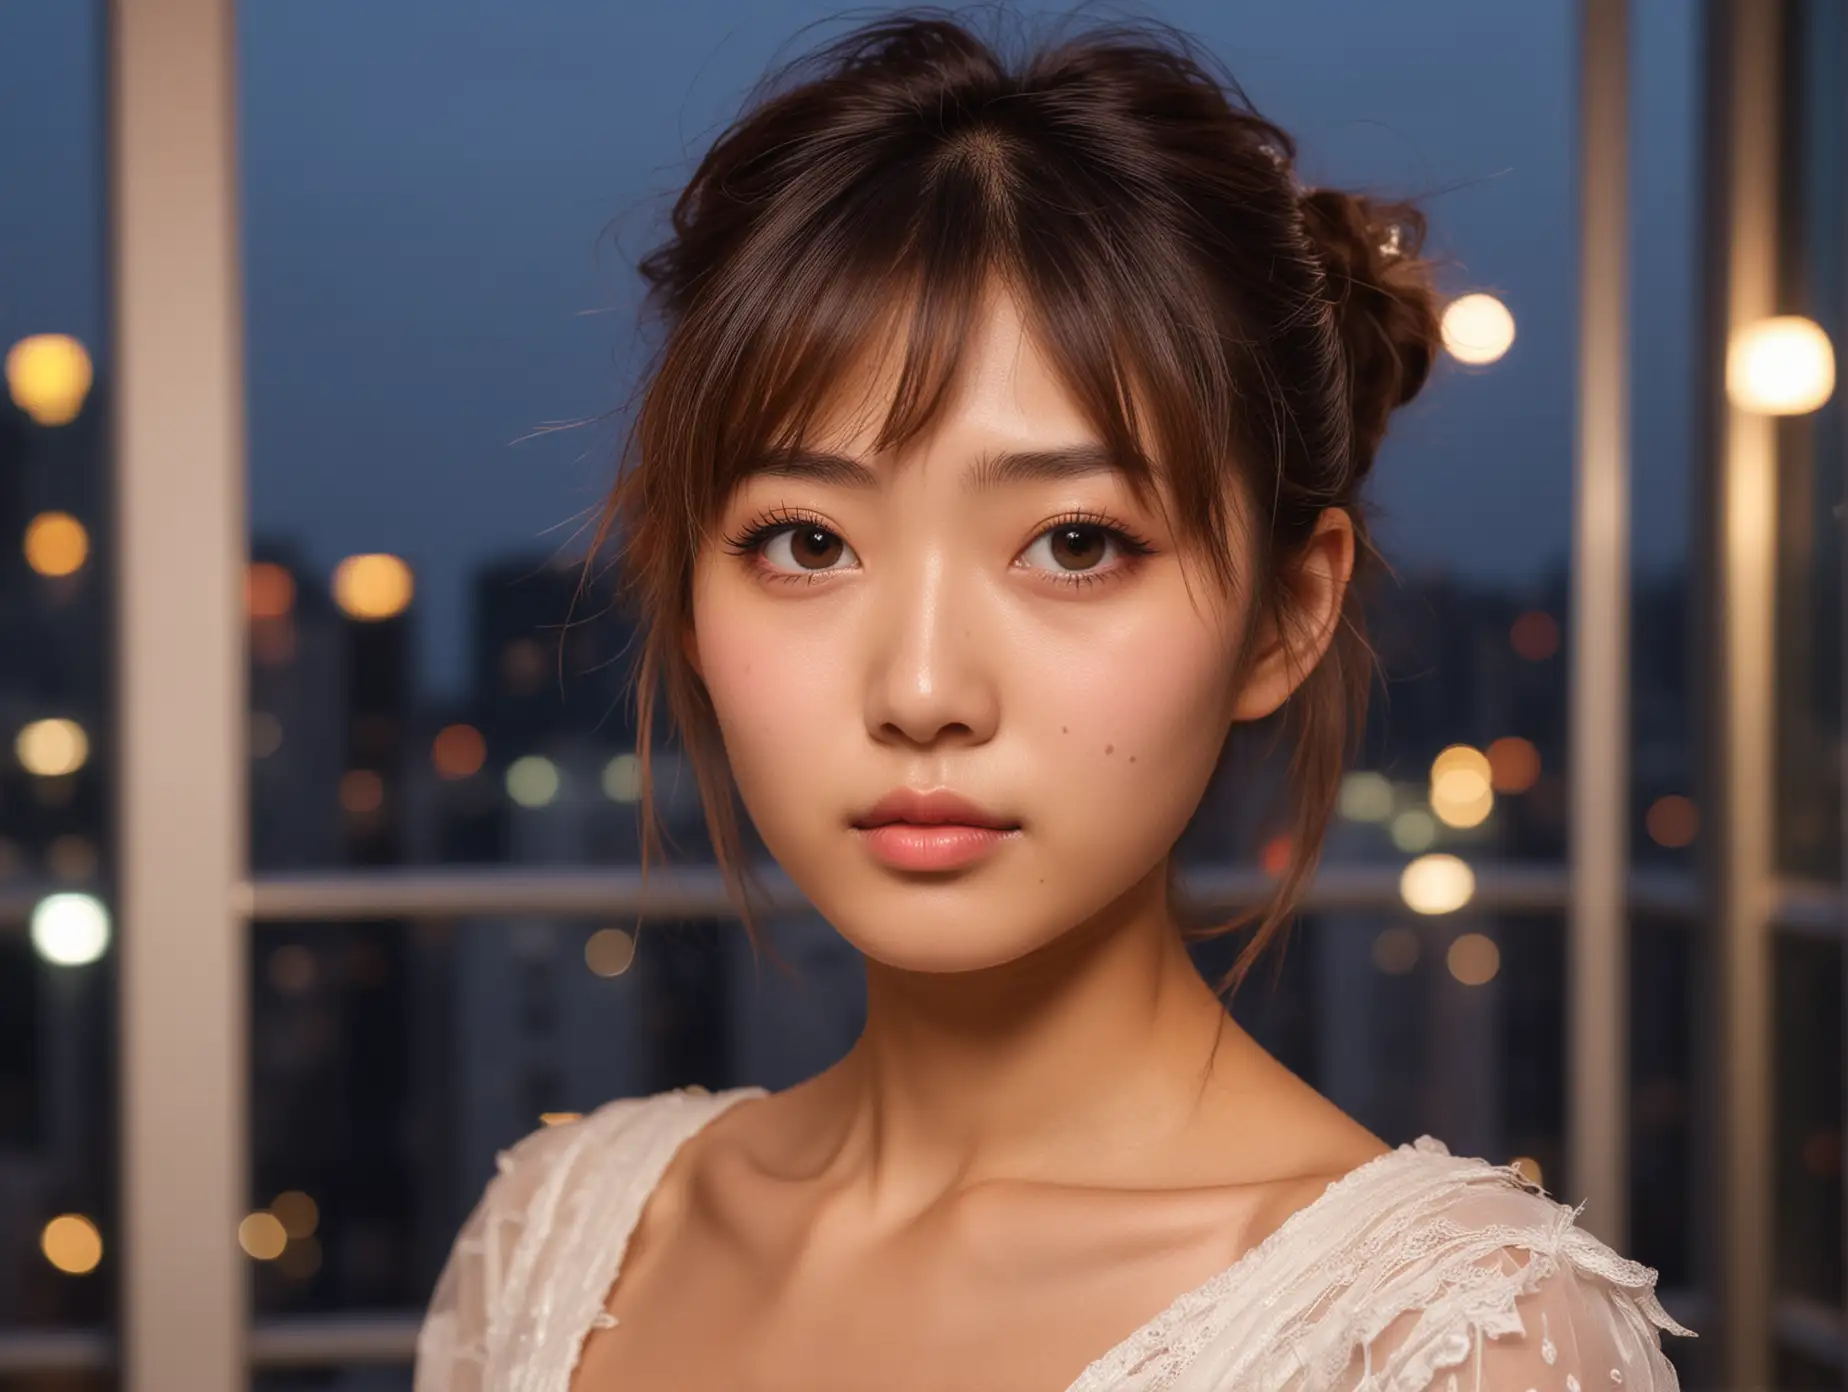 face of an angelic sweet skinny japanese fashion model at a party at dusk in a luxury high rise. she has a sweet kind face and soulful intelligent eyes.